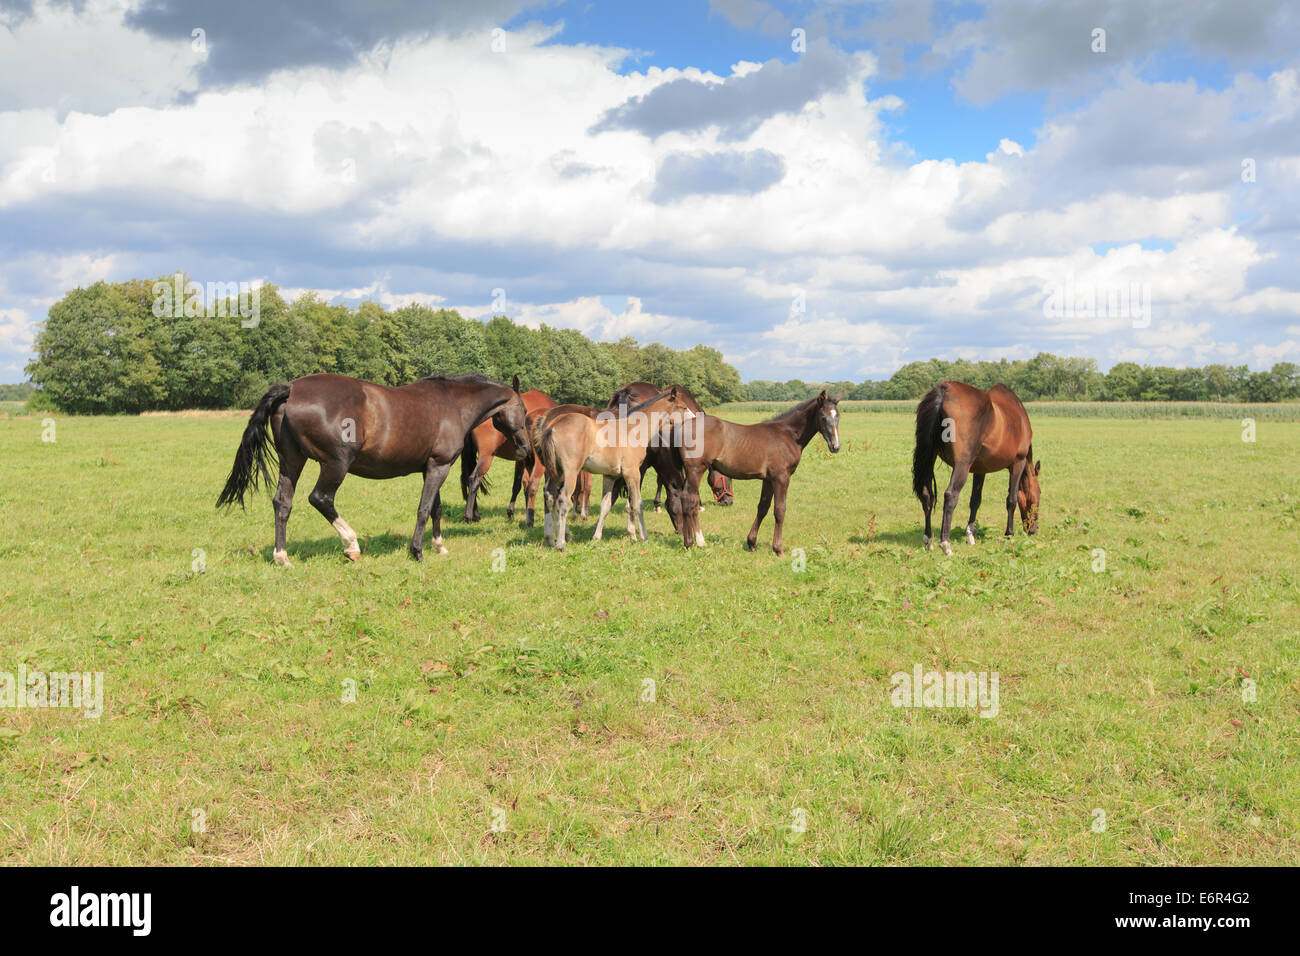 A herd of horses, mares and foals, in a green pasture with a row of trees in the background and a Dutch cloudy sky. Stock Photo